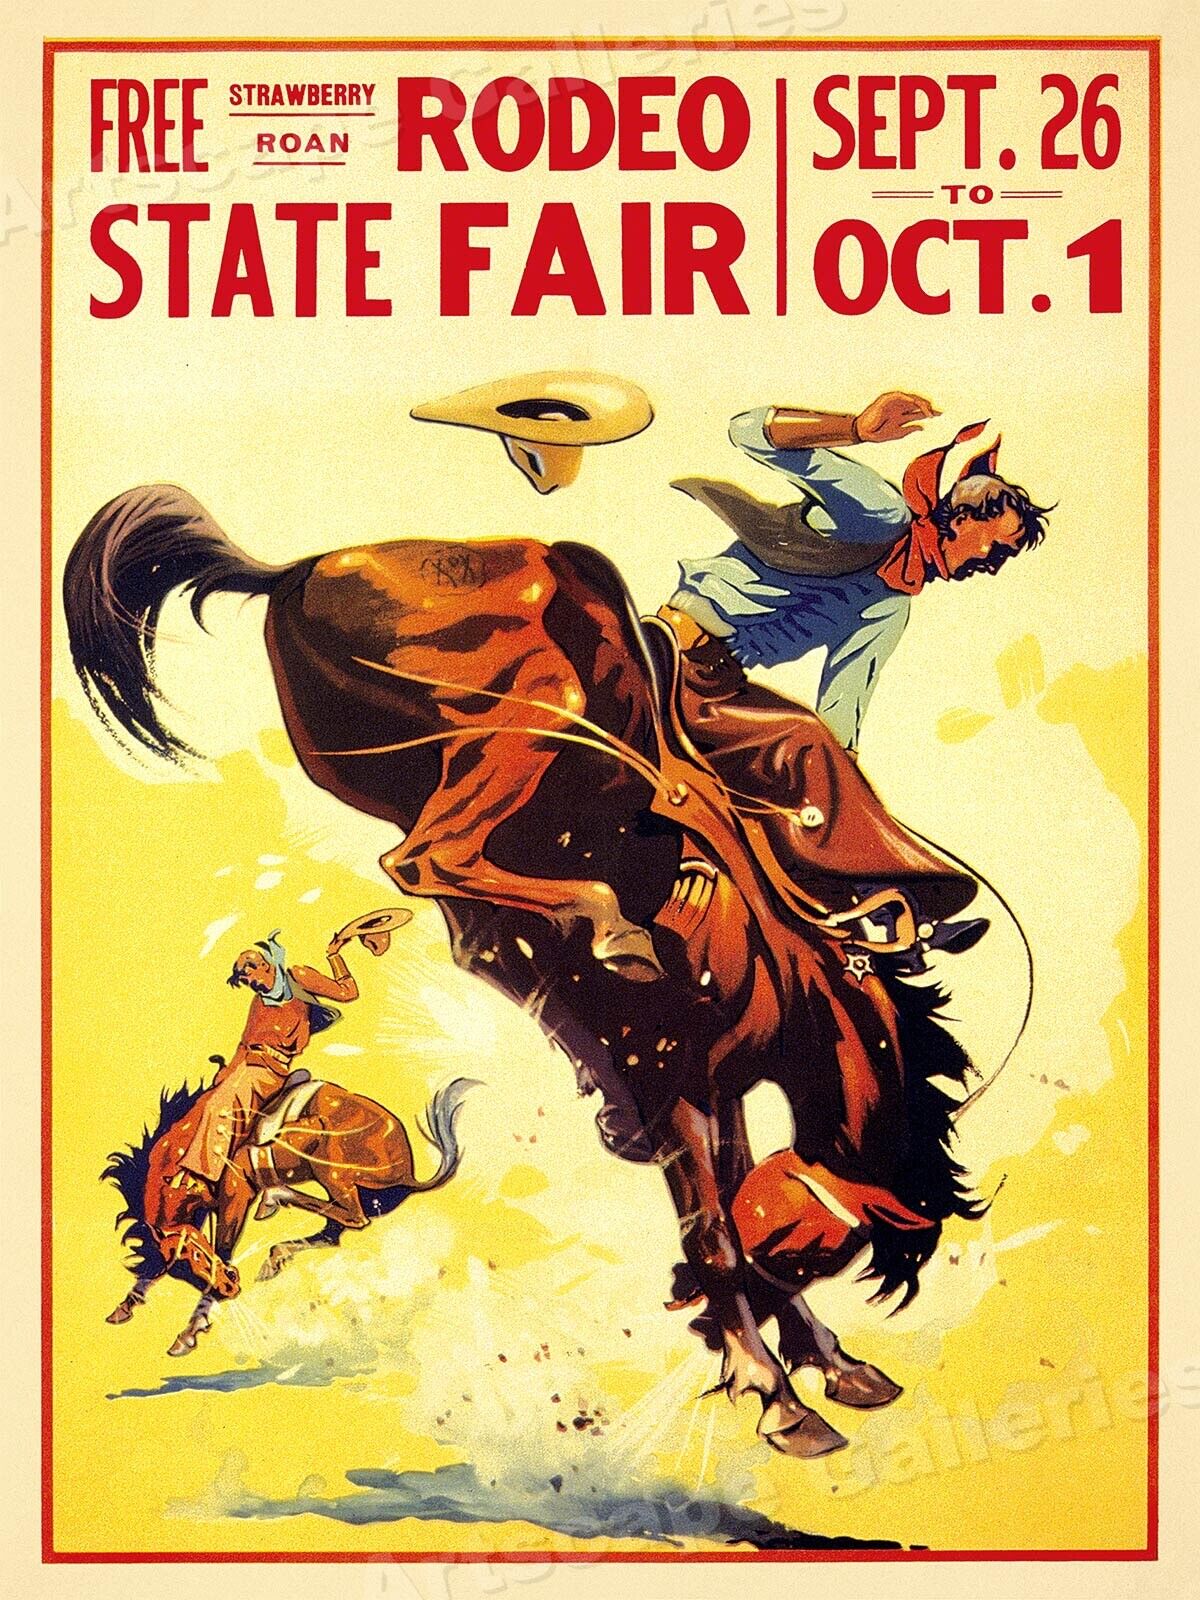 1930s State Fair Rodeo Poster Cowboy Vintage Style Western Poster - 18x24 